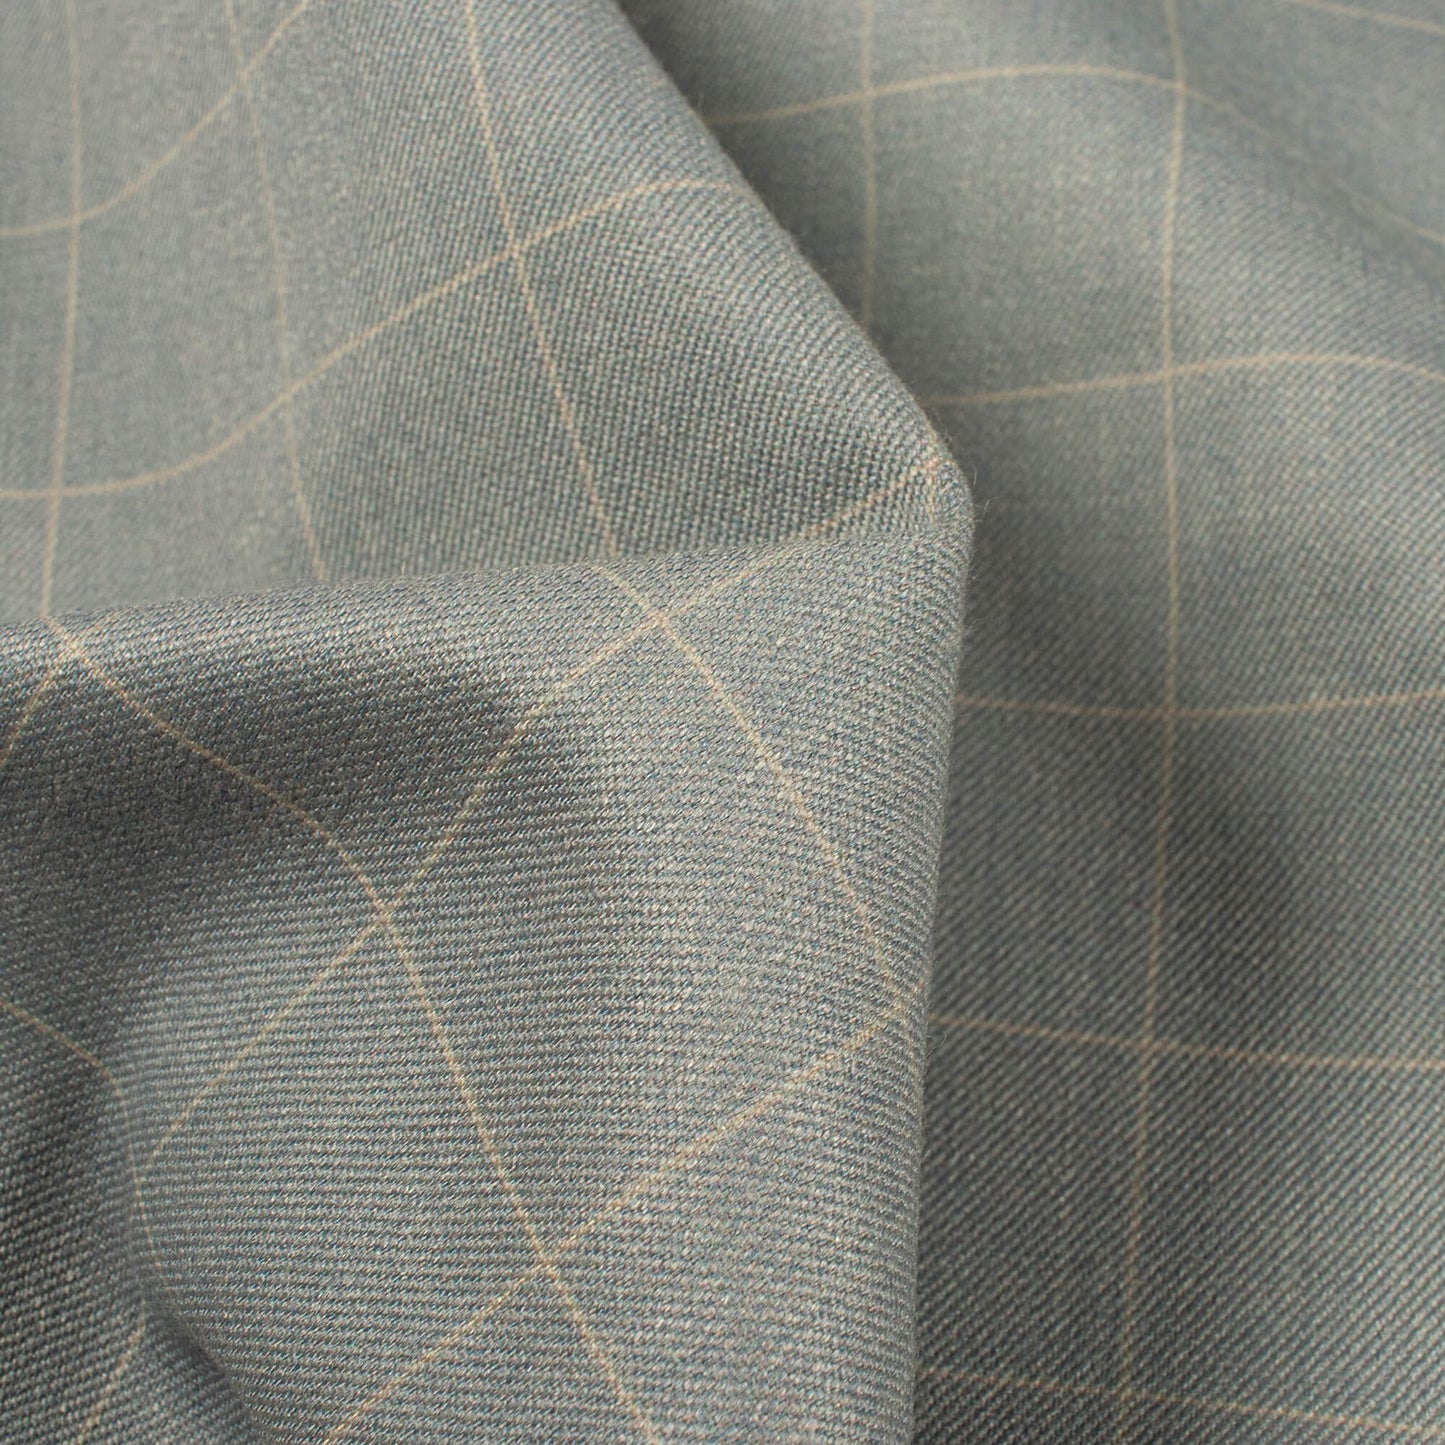 Dusty Blue Checks Printed Luxury Suiting Fabric